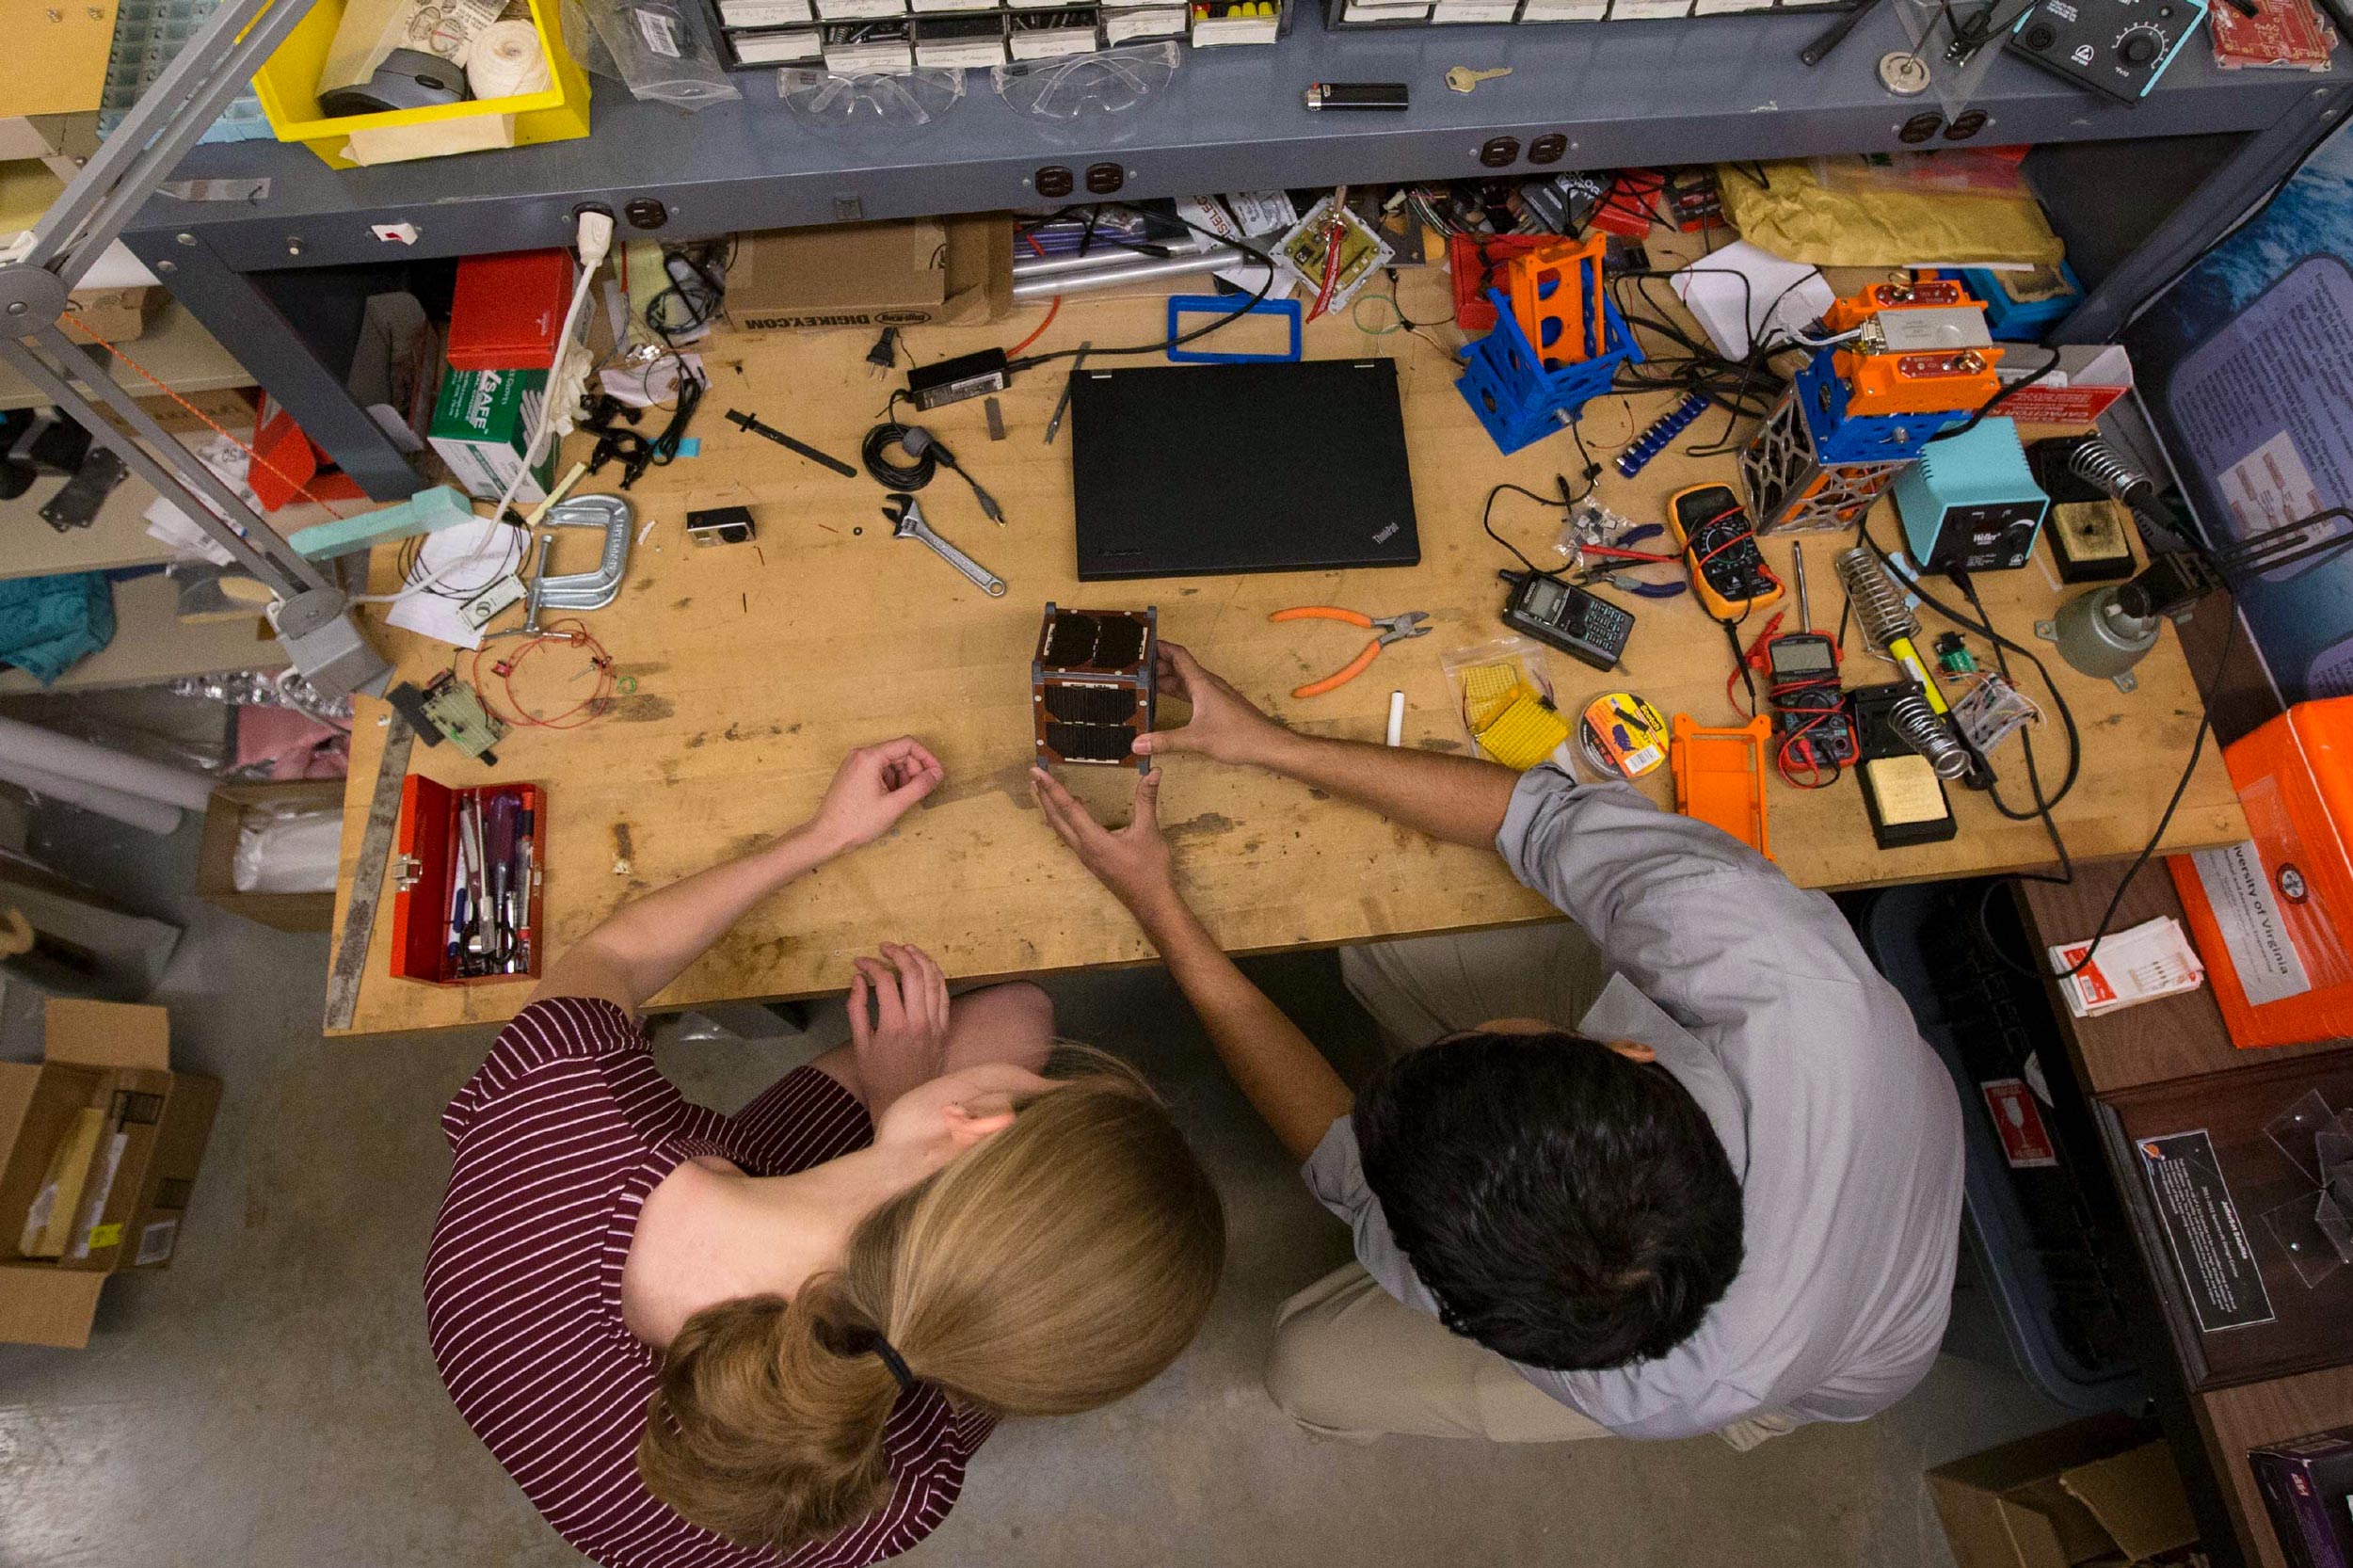  Robin Leiter, left, and Chandrakanth “C.K.” Venigalla, work on an early iteration of UVA’s CubeSat